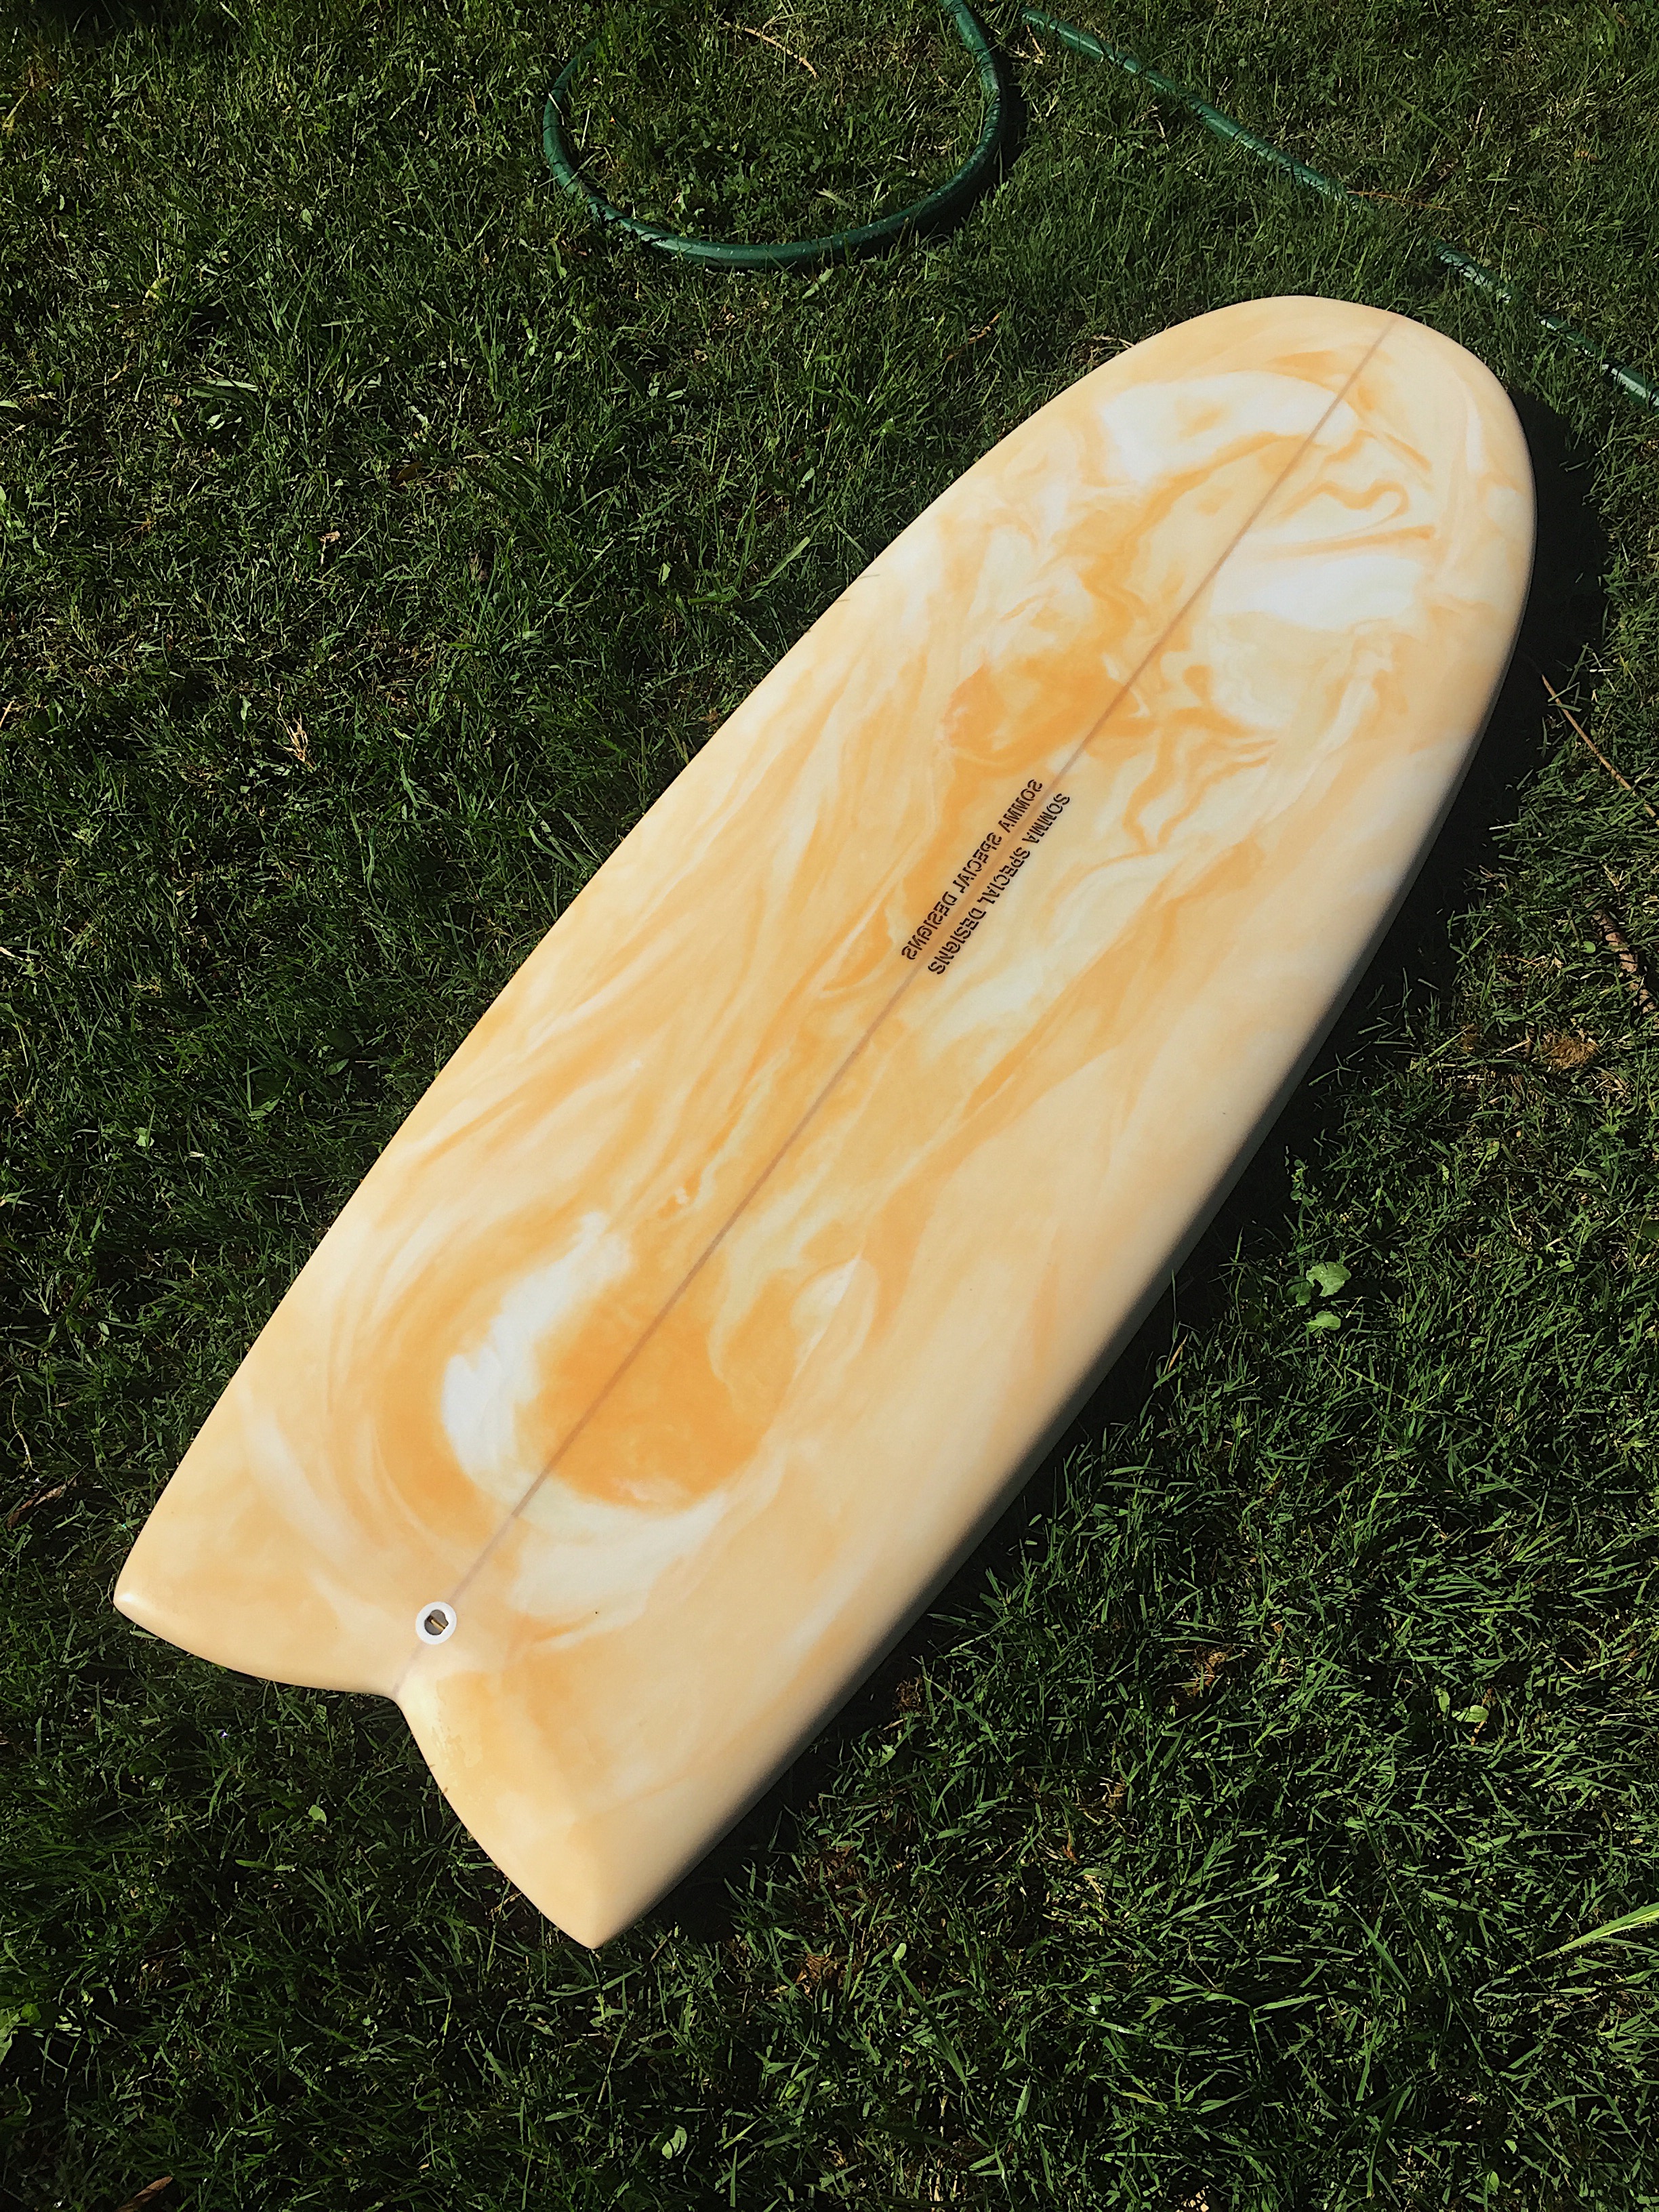 Mini Super custom surfboard hand shaped by Central Coast shaper Shea Somma of Somma Special Designs.